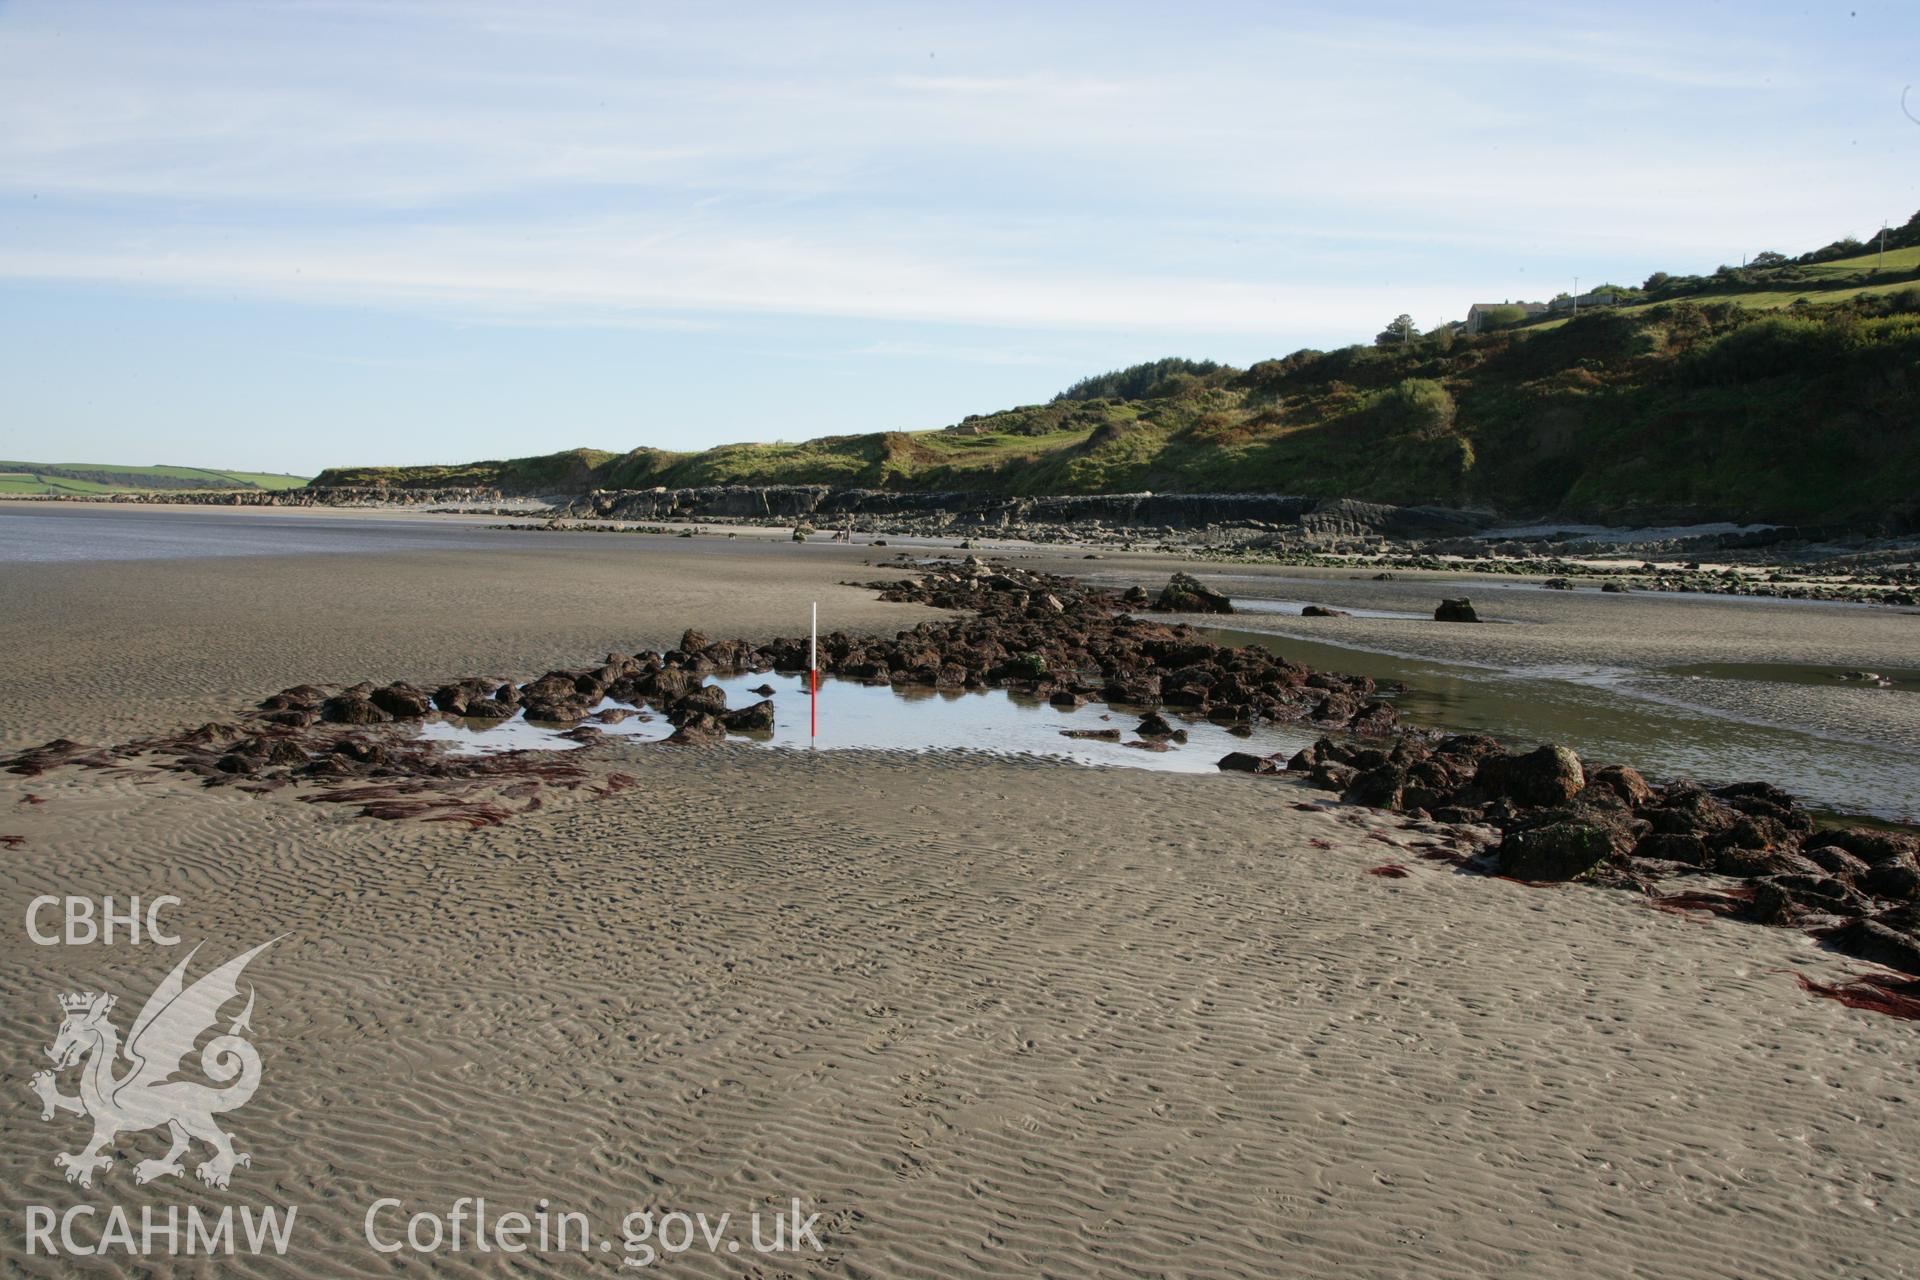 Poppit Fish Trap at low tide, photographed during filming for the TV series 'What on Earth?' with the Discovery Channel.